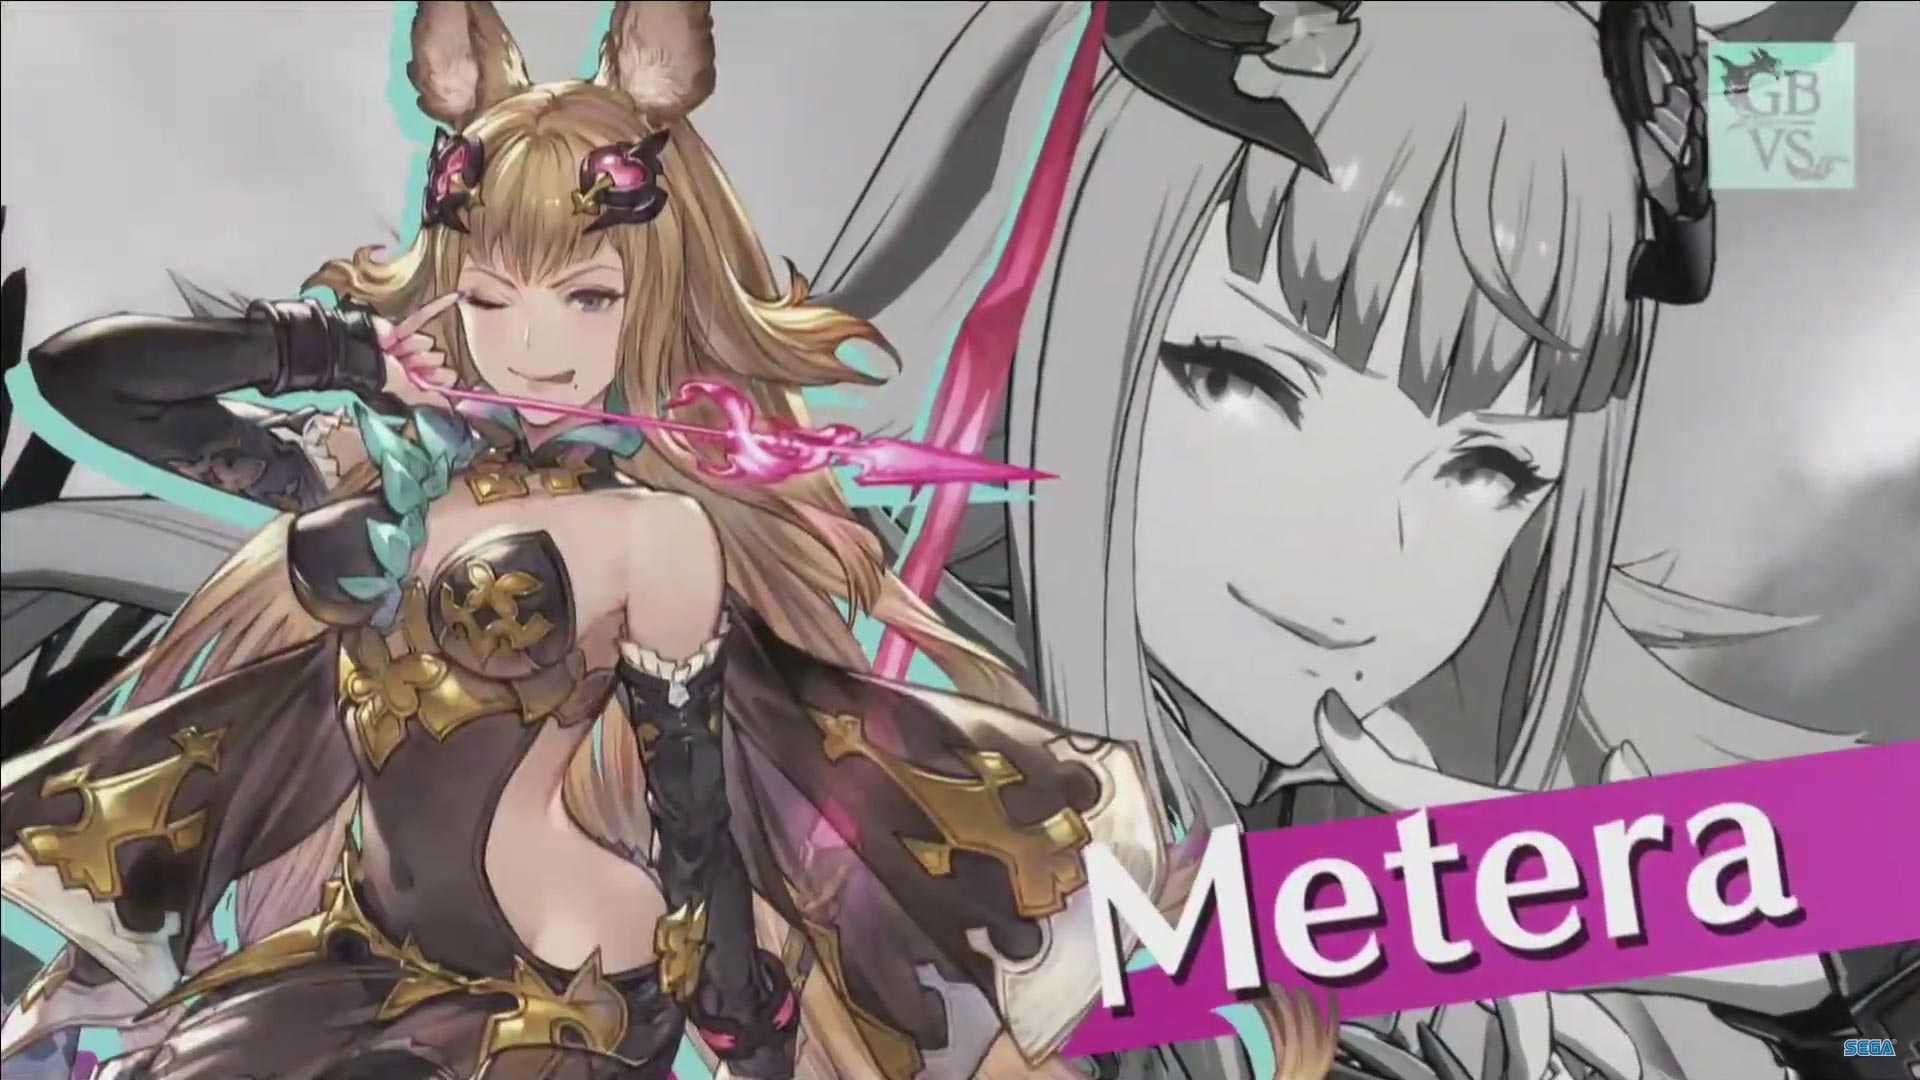 GranBlue Fantasy Versus Metera Reveal Image 3 out of 9 image gallery